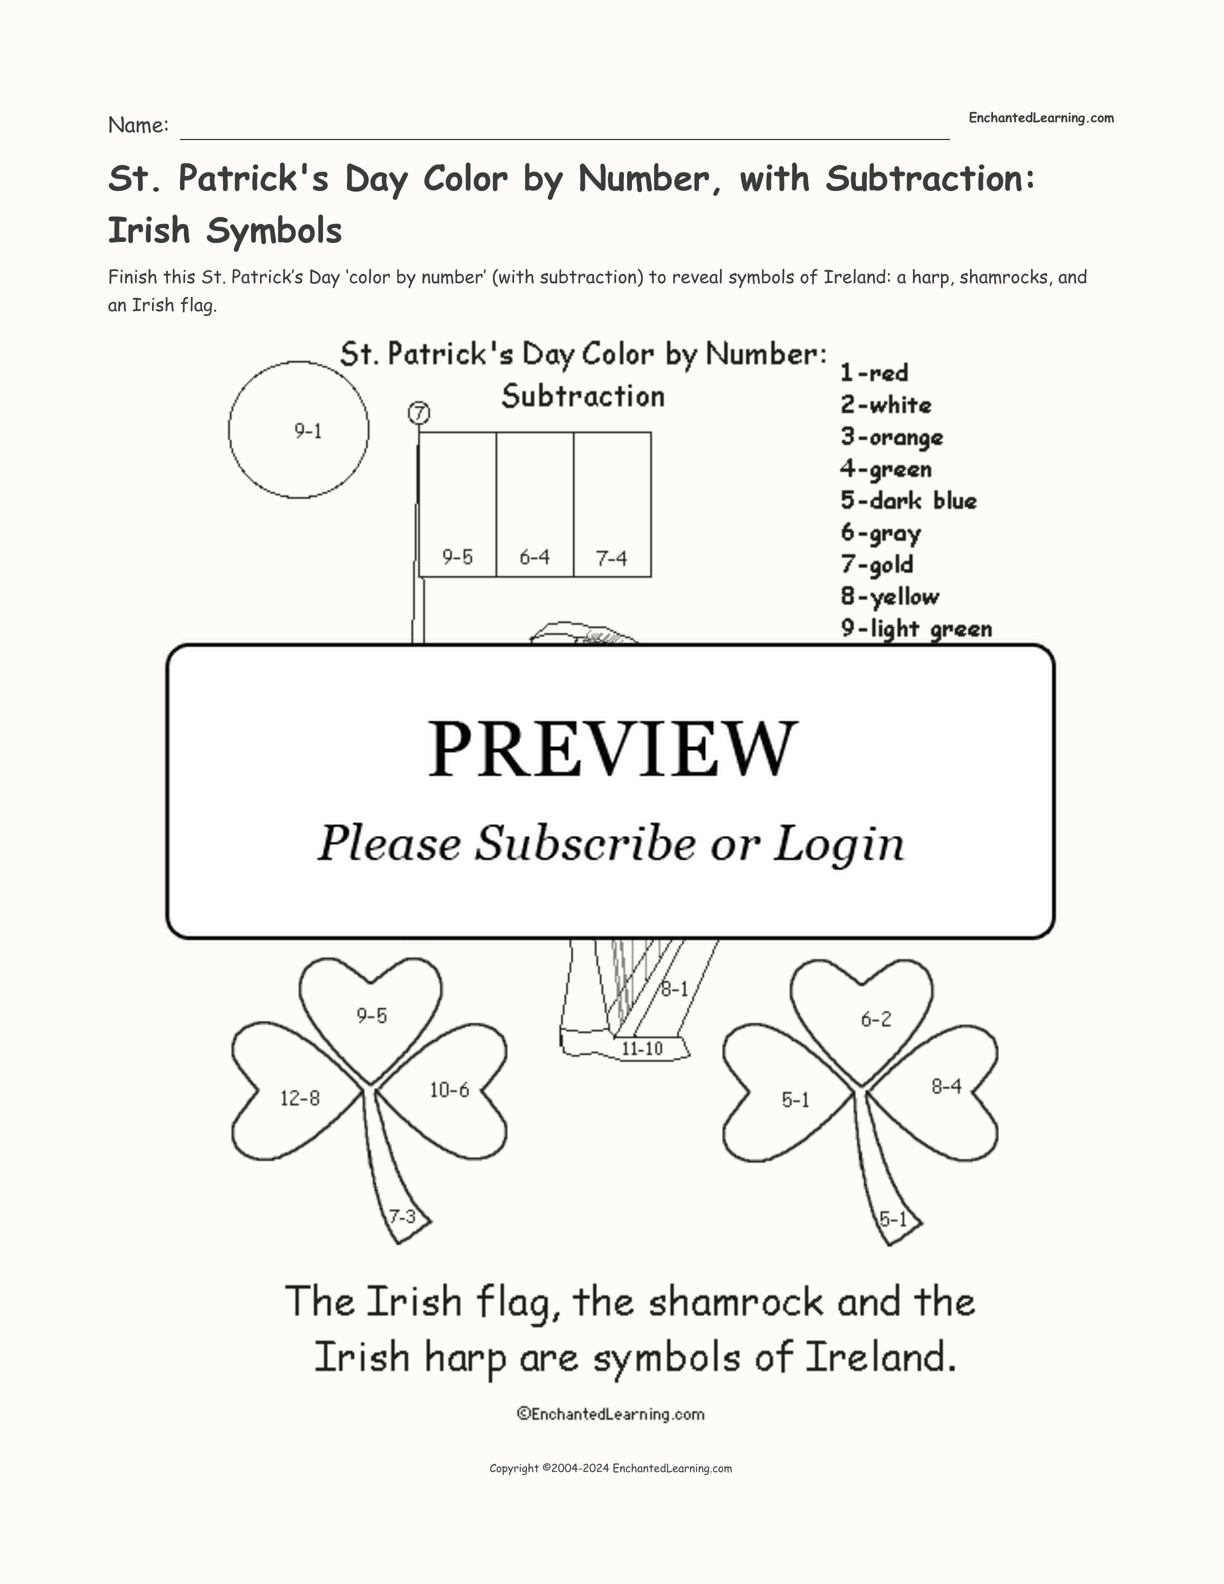 St. Patrick's Day Color by Number, with Subtraction: Irish Symbols interactive printout page 1